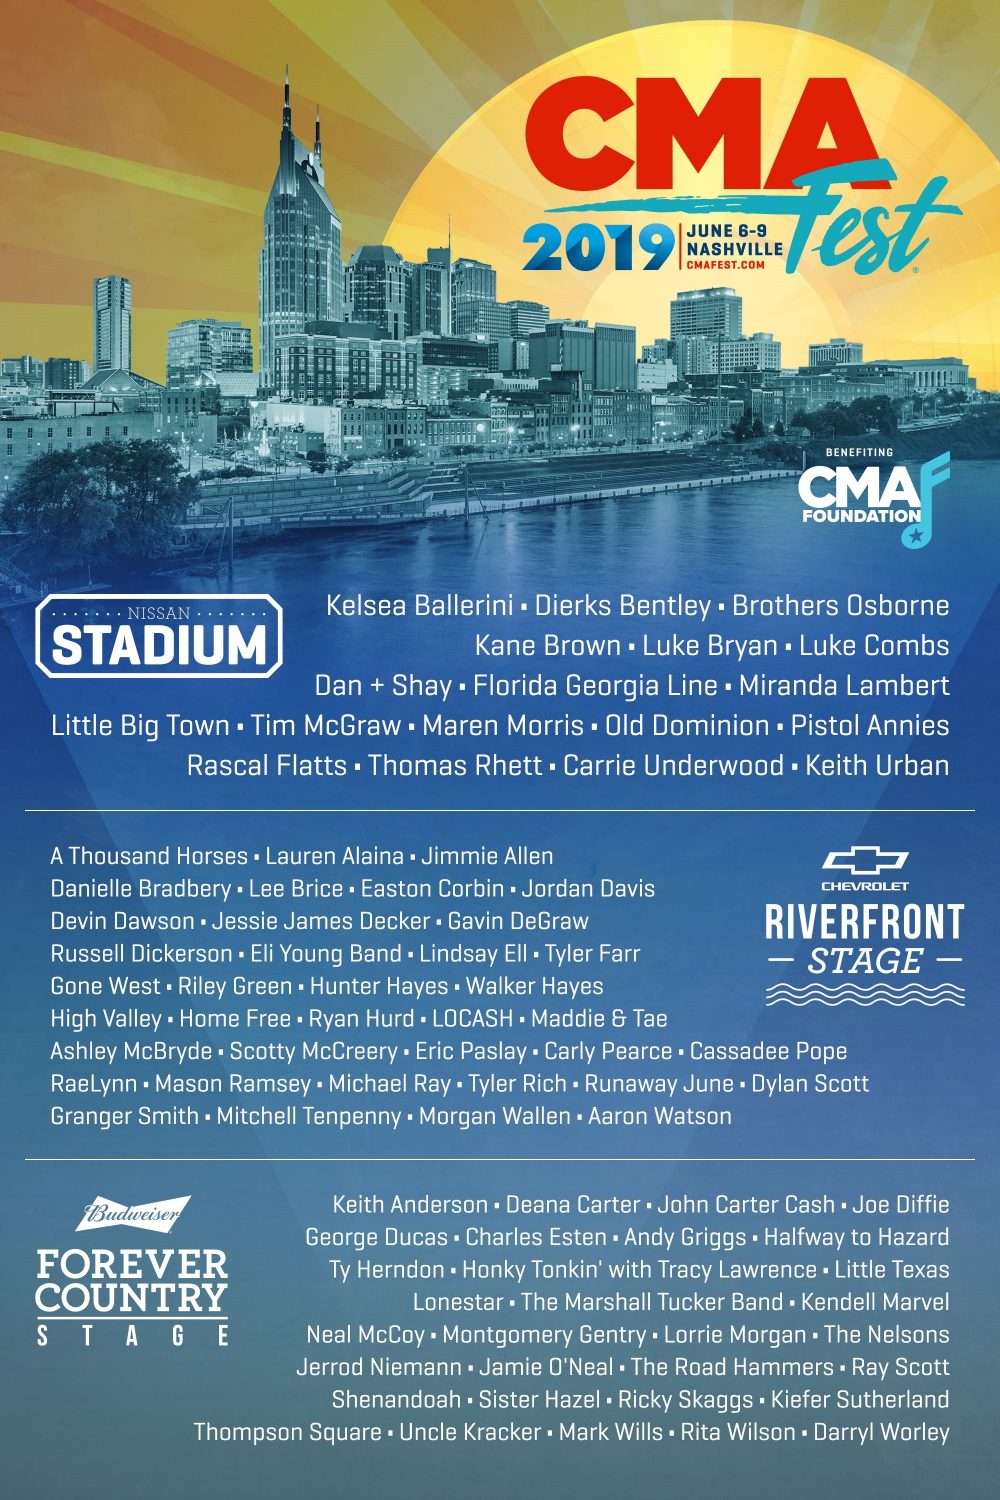 Luke Bryan, Carrie Underwood, Keith Urban and More Lead 2019 CMA Fest Lineup Sounds Like Nashville